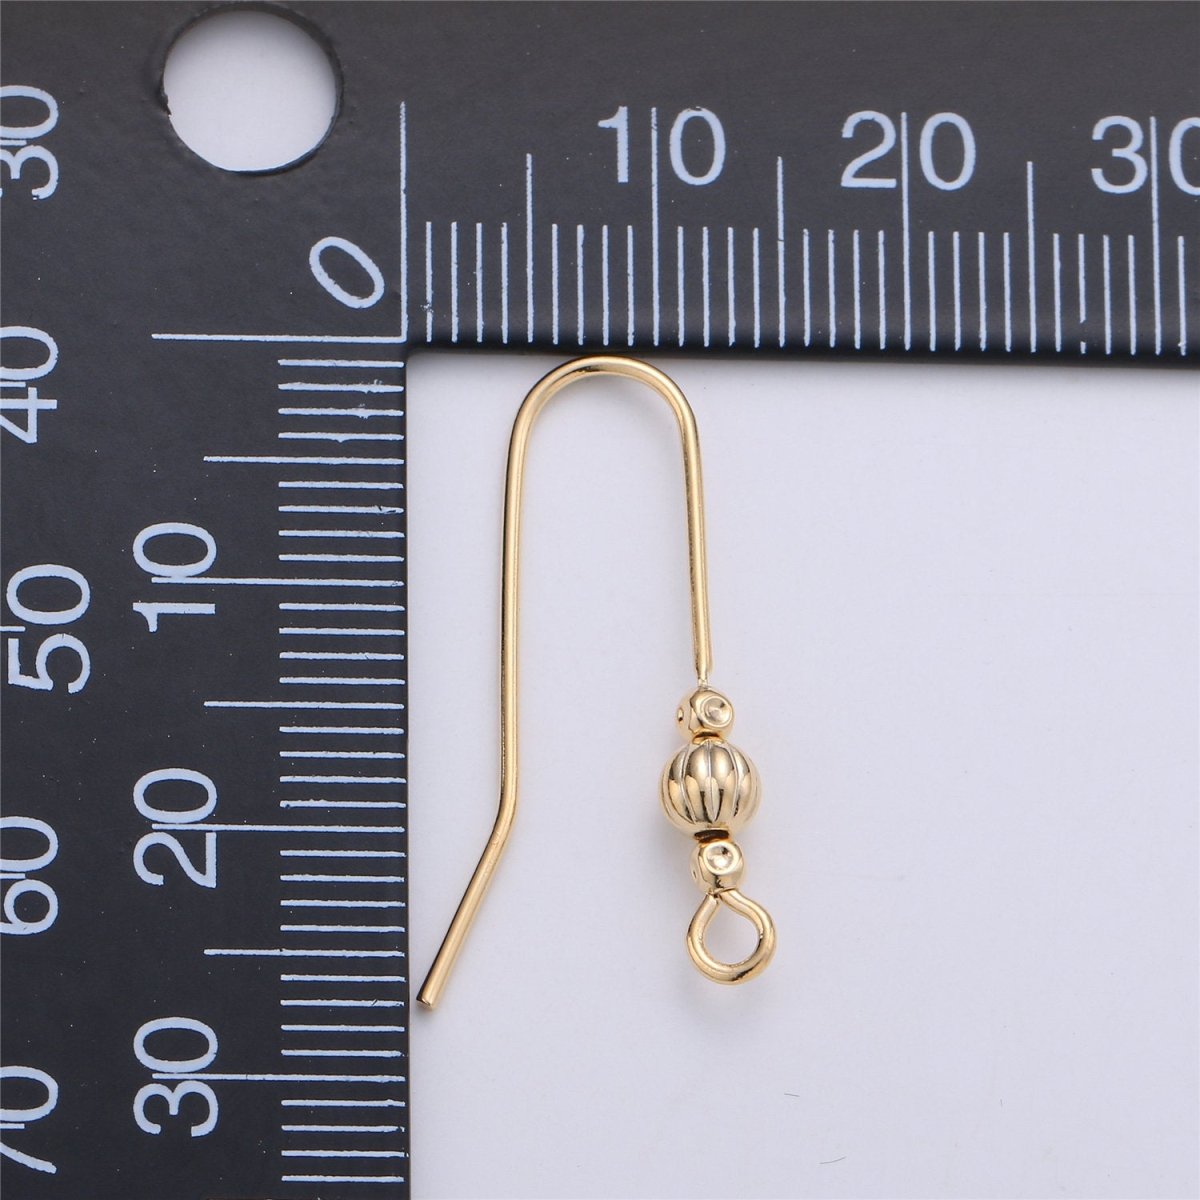 OS Ear Hooks 14k Gold Filled Ear Wires with Open Link for Charm, Handmade Earring Findings, Gold Earwires, DIY Jewelry Supply Component K-222 - DLUXCA